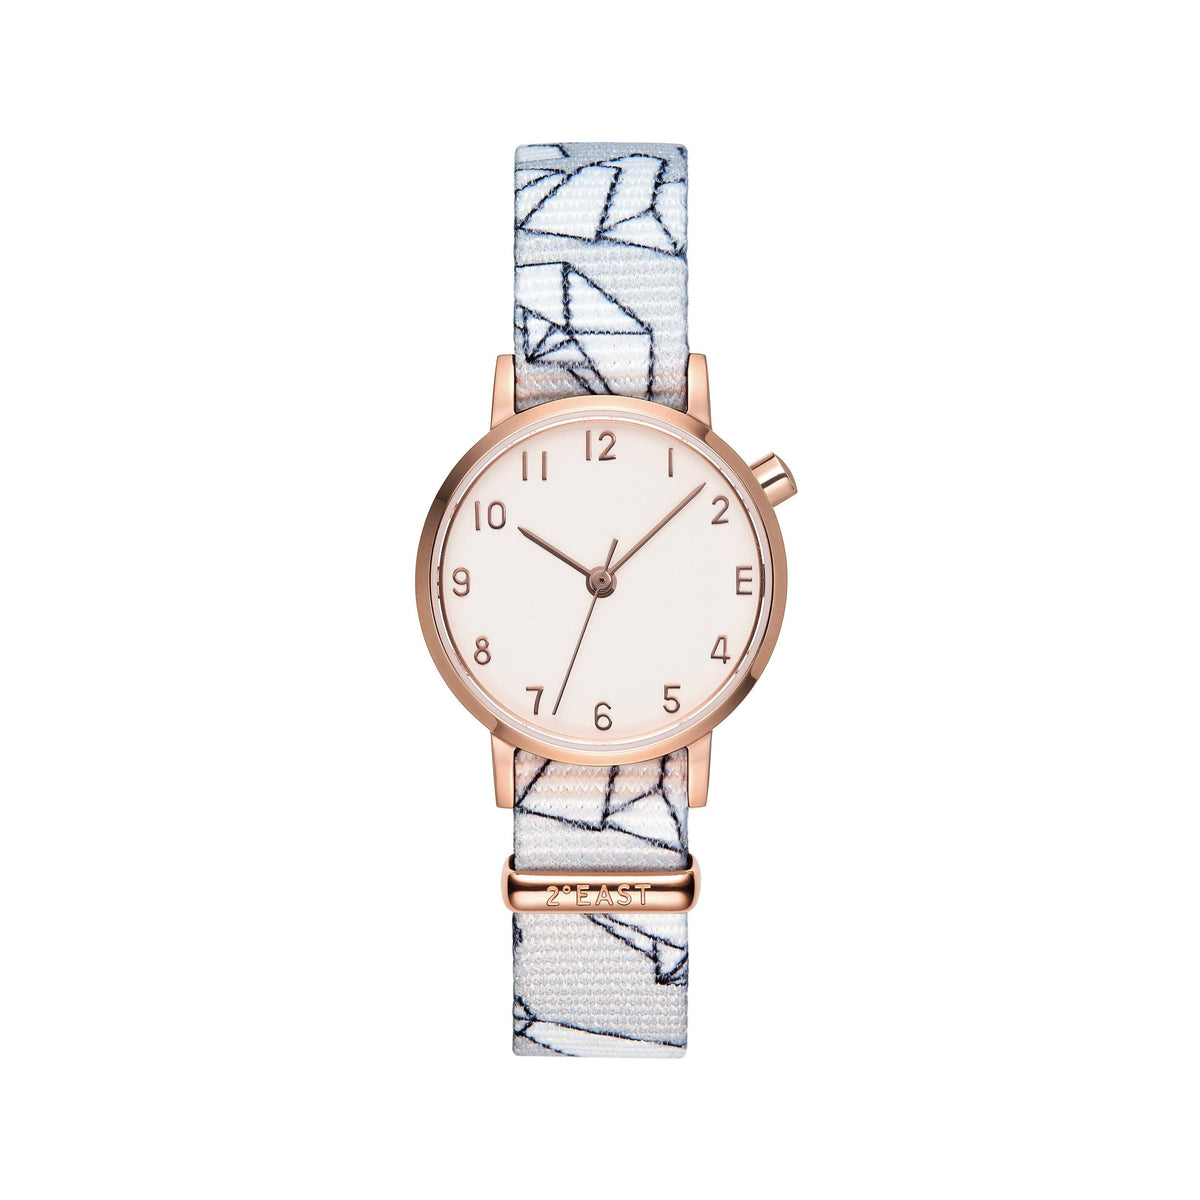 The White and Rose Gold Watch - Origami (Kids)